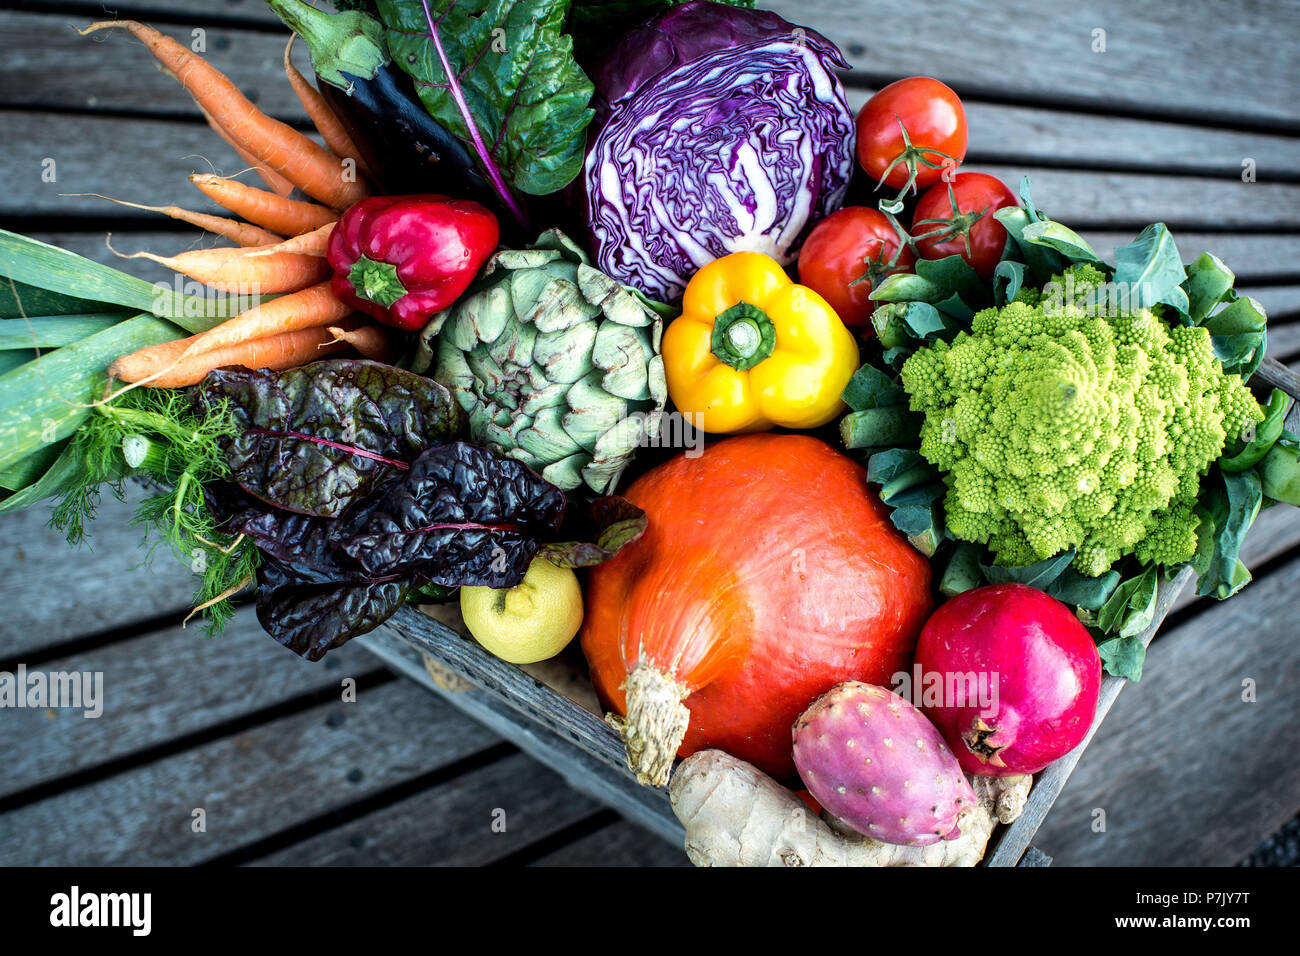 https://c8.alamy.com/comp/P7JY7T/organic-box-wooden-box-with-colourful-vegetables-and-fruits-strong-colours-P7JY7T.jpg